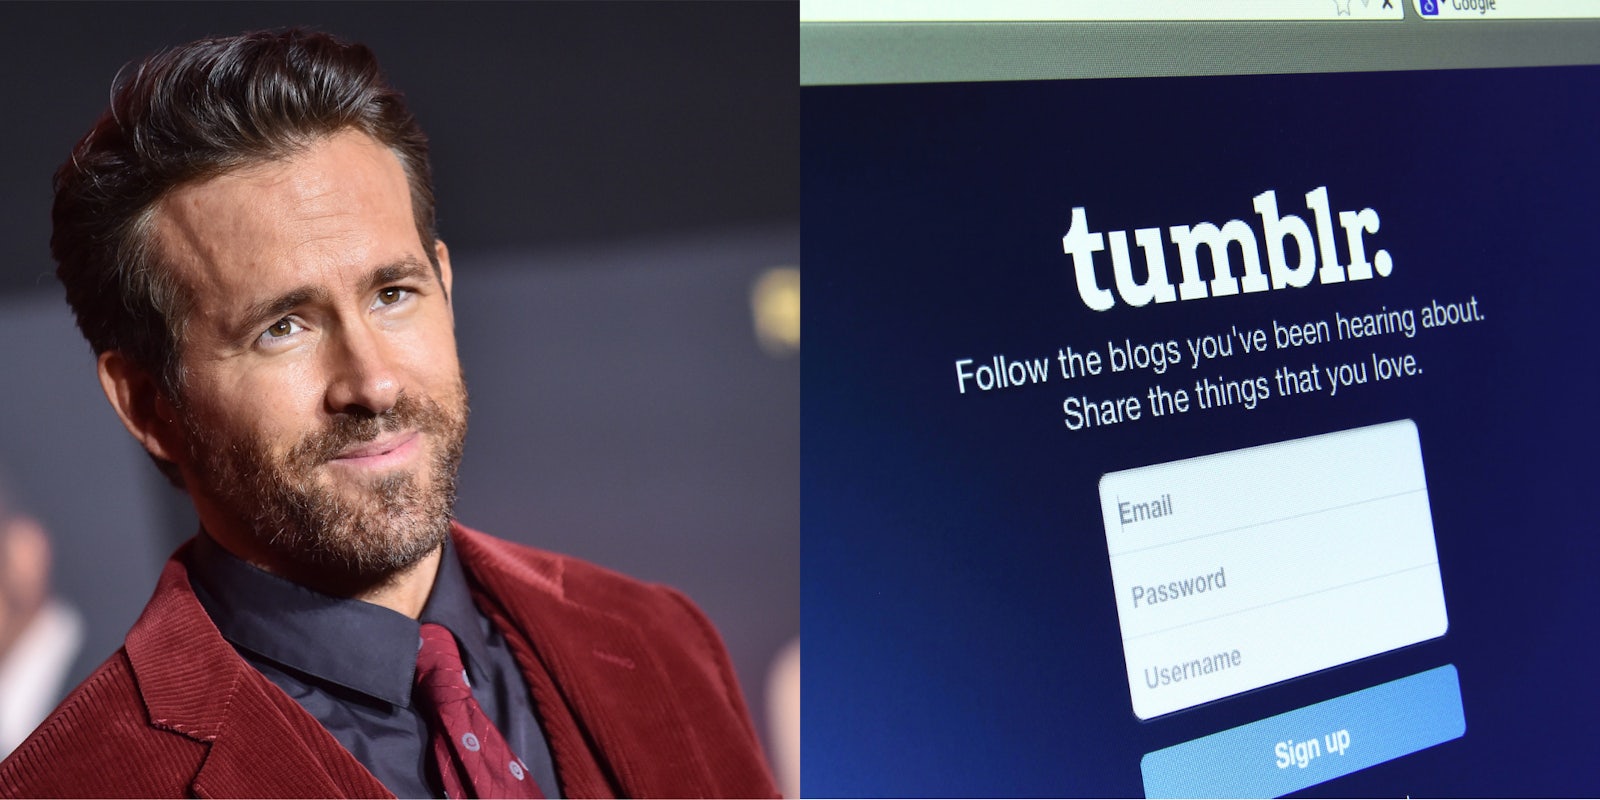 ryan reynolds on a red carpet photo and tumblr welcome screen